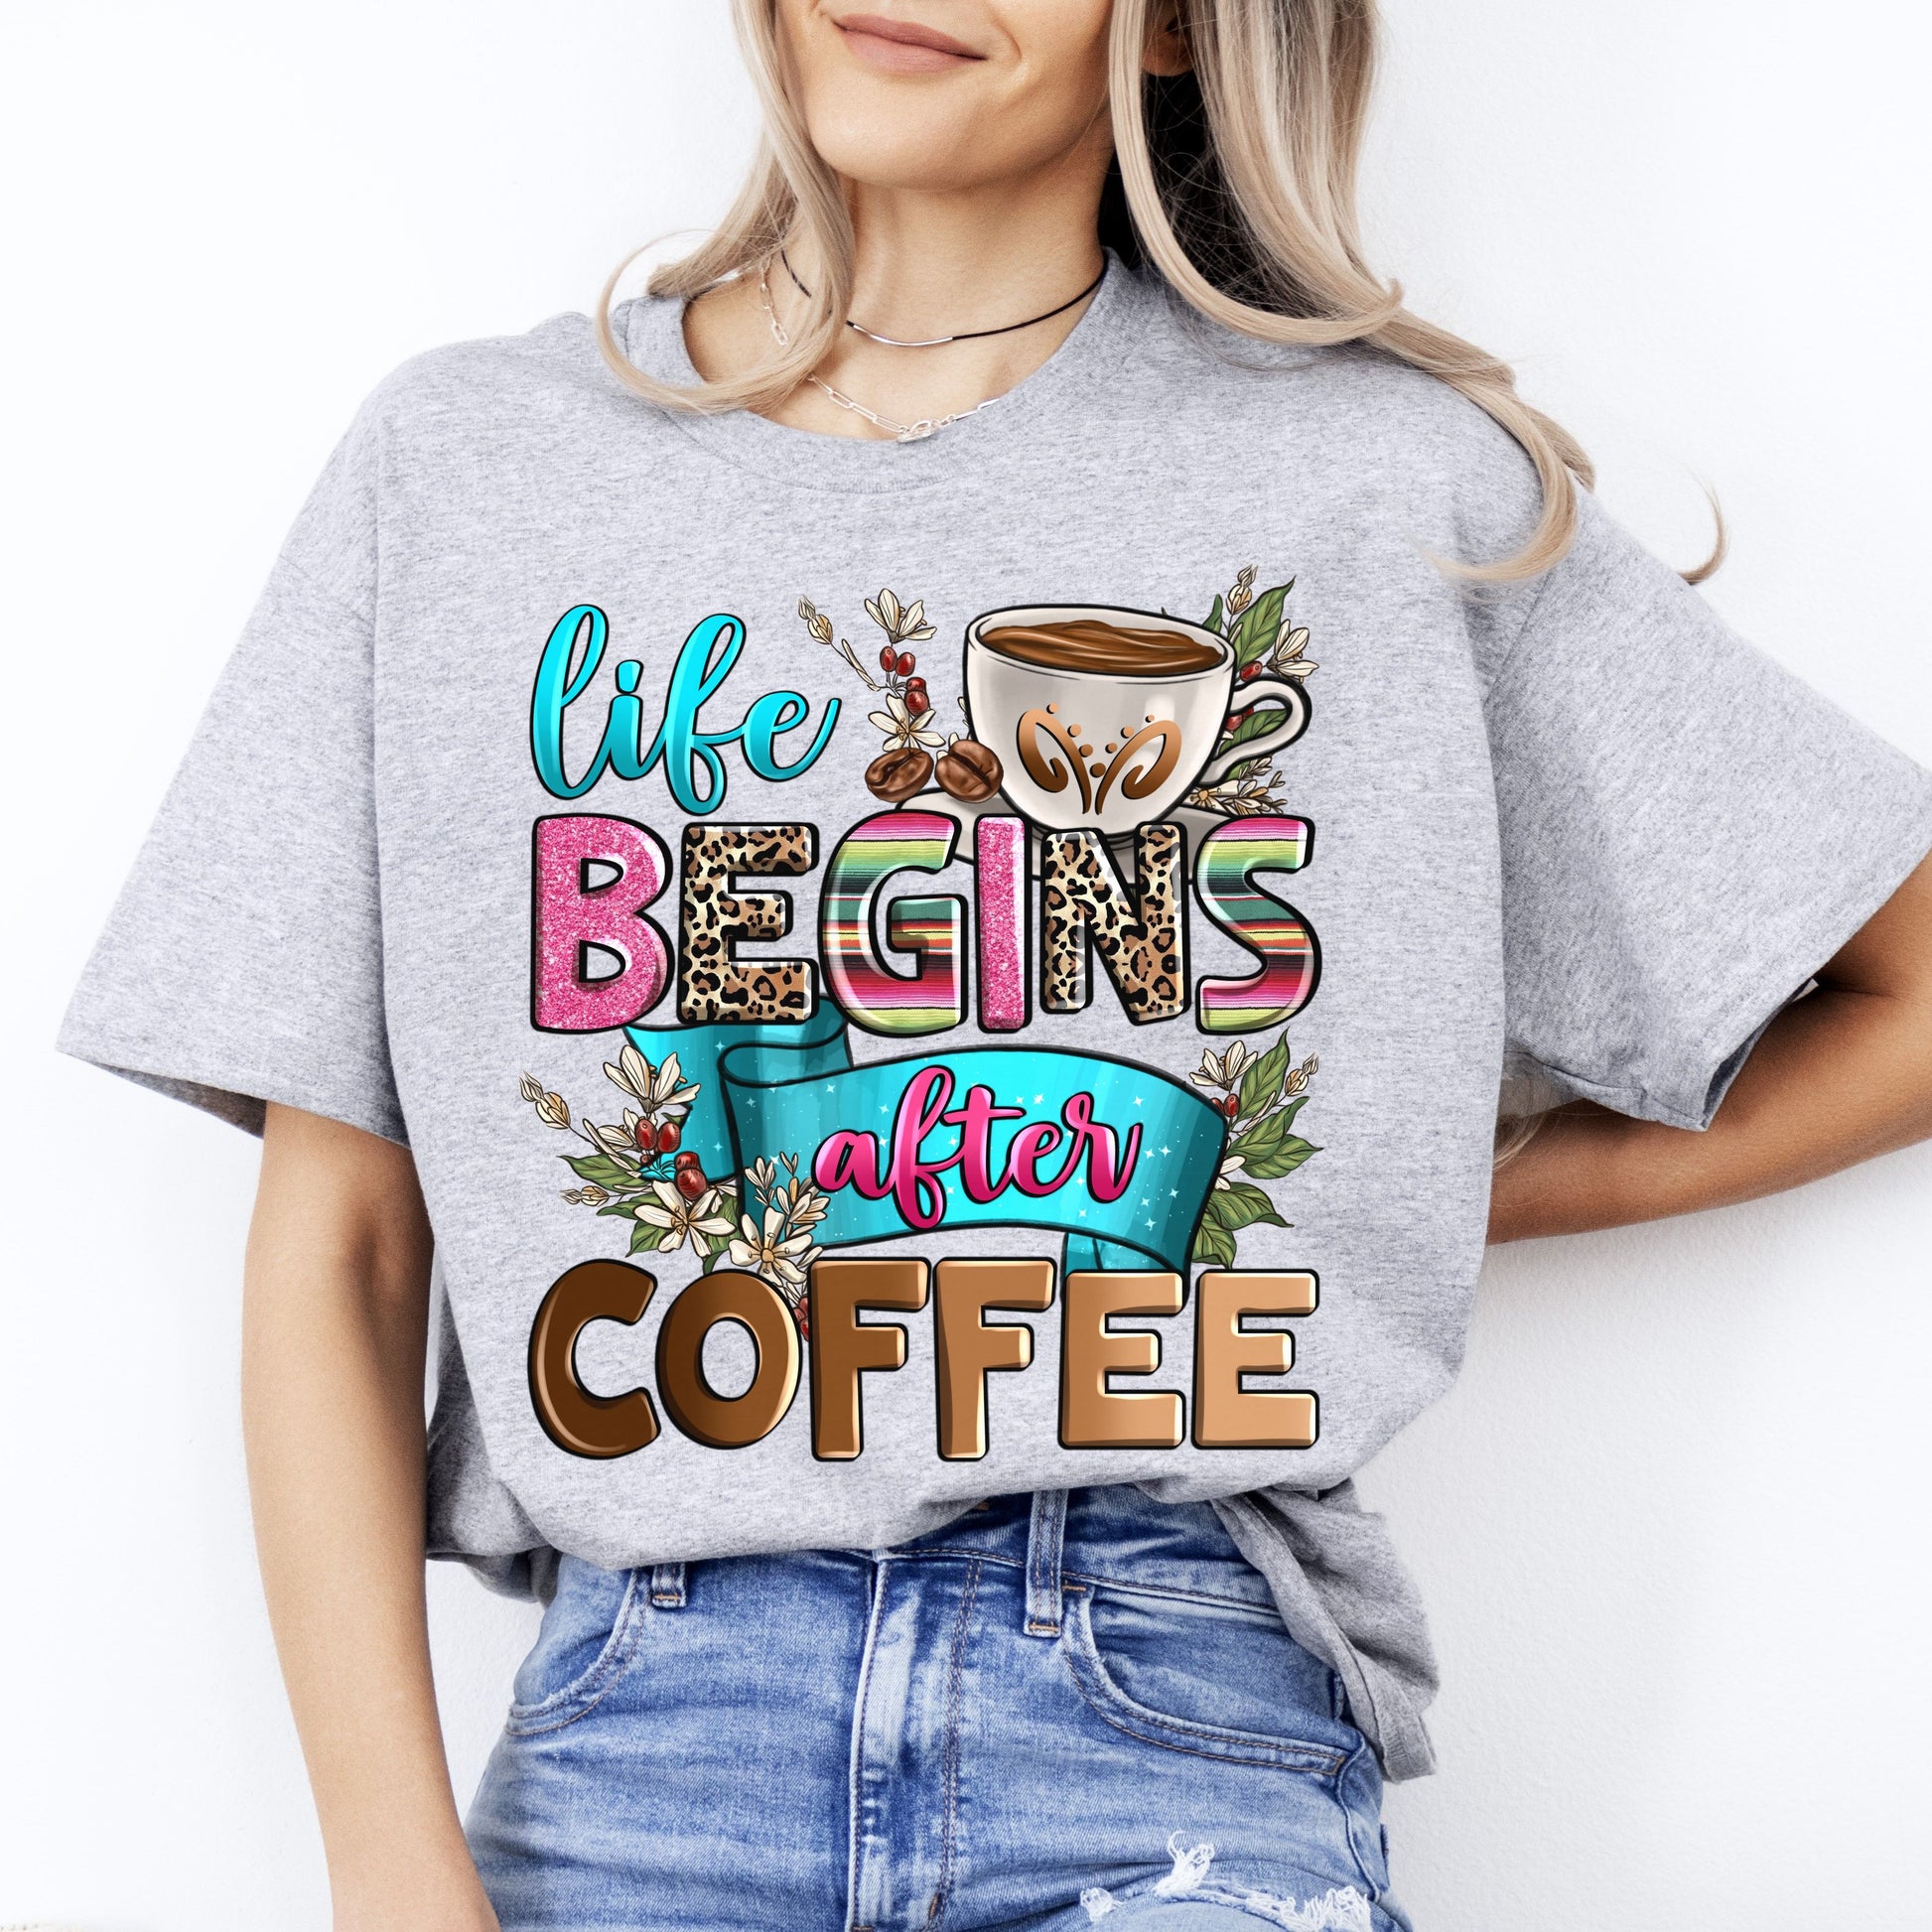 Life begins after coffee T-Shirt gift Morning Coffee lover Unisex Tee Sand White Sport Grey-Sport Grey-Family-Gift-Planet